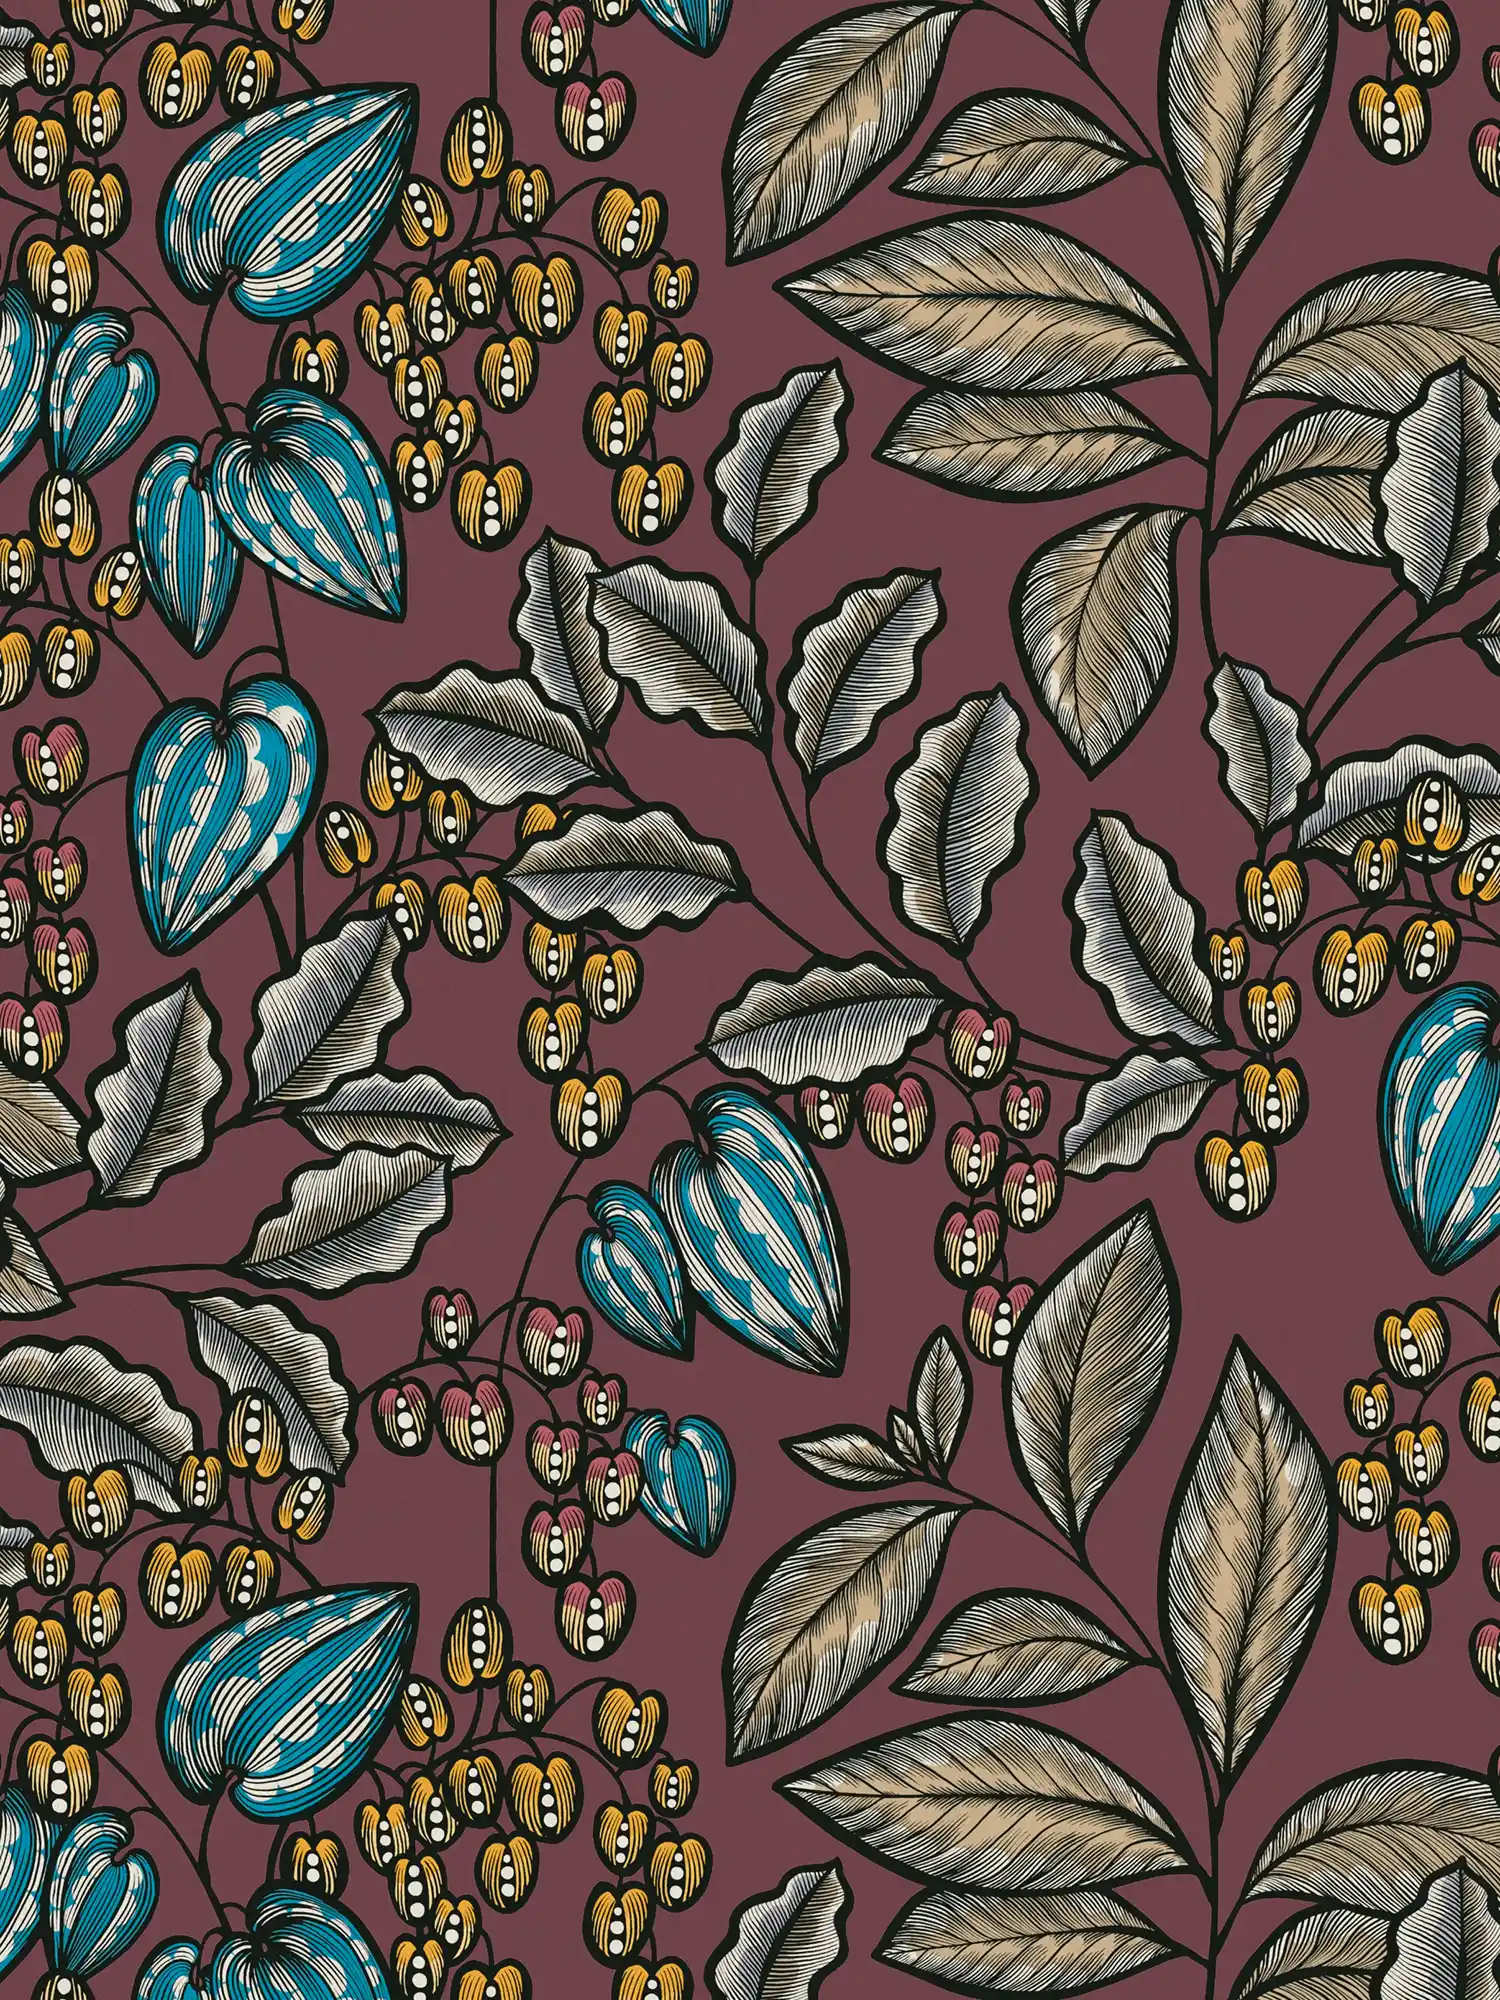         Floral wallpaper purple with leaves print in Scandinavian style
    